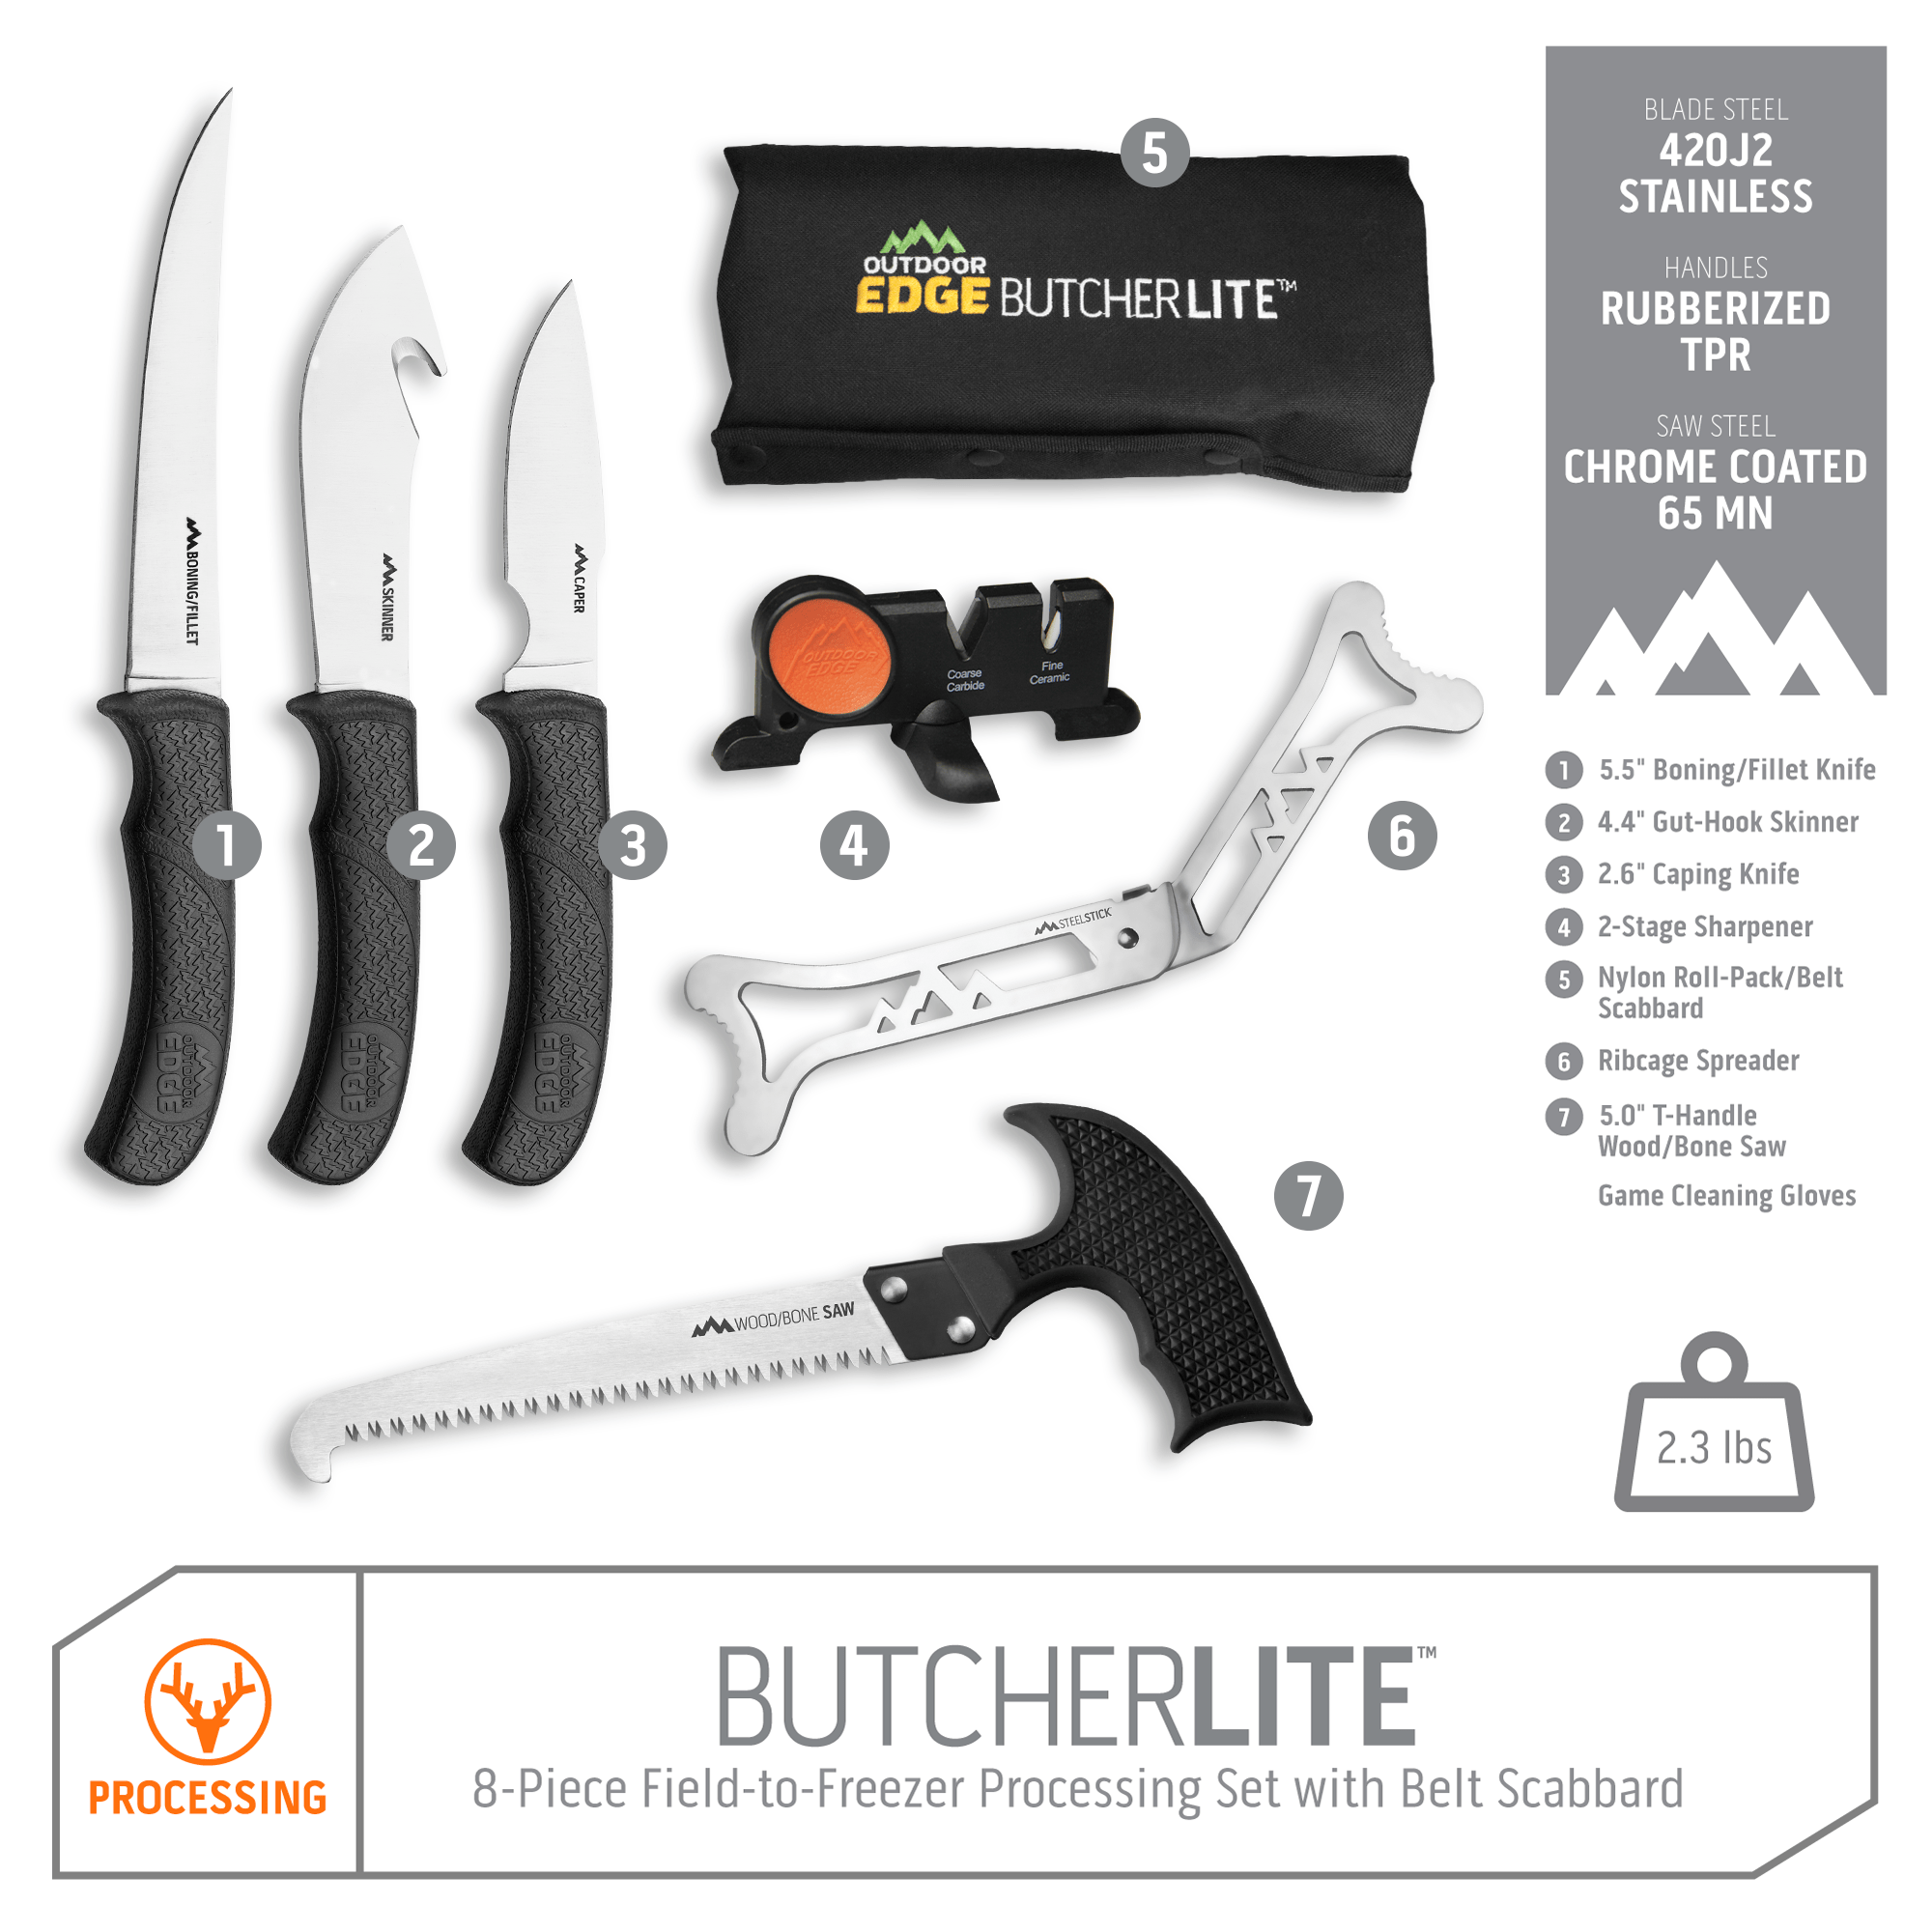 Outdoor Edge Wild Lite 5", 4", 2.5" Knives and 2-Stage  Sharpener Butcher Kit